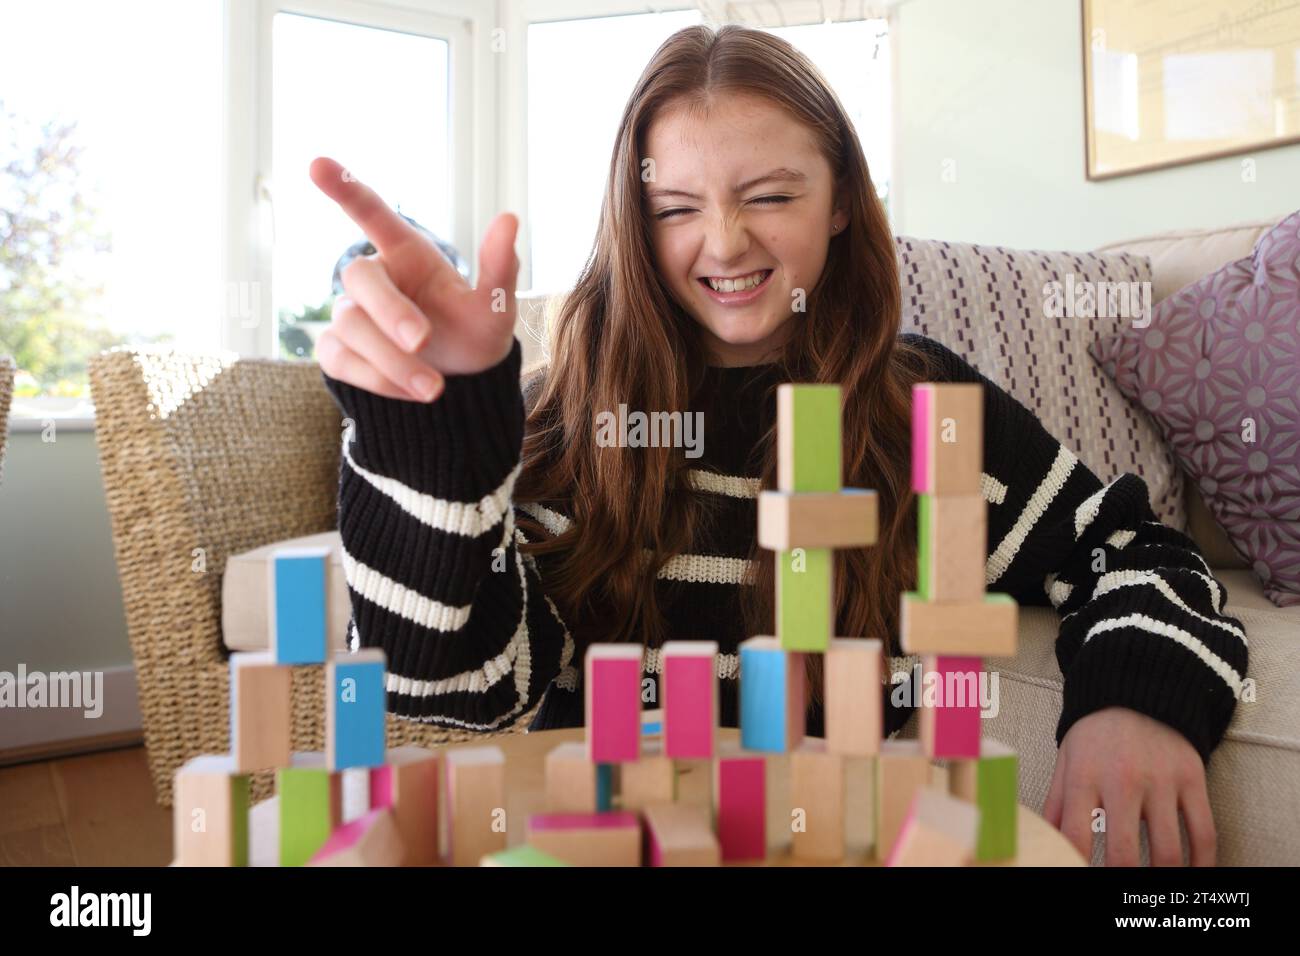 Teenage girl smiling and laughing destroying a wall and towers of wooden blocks, knocking down the pattern with her hand Stock Photo